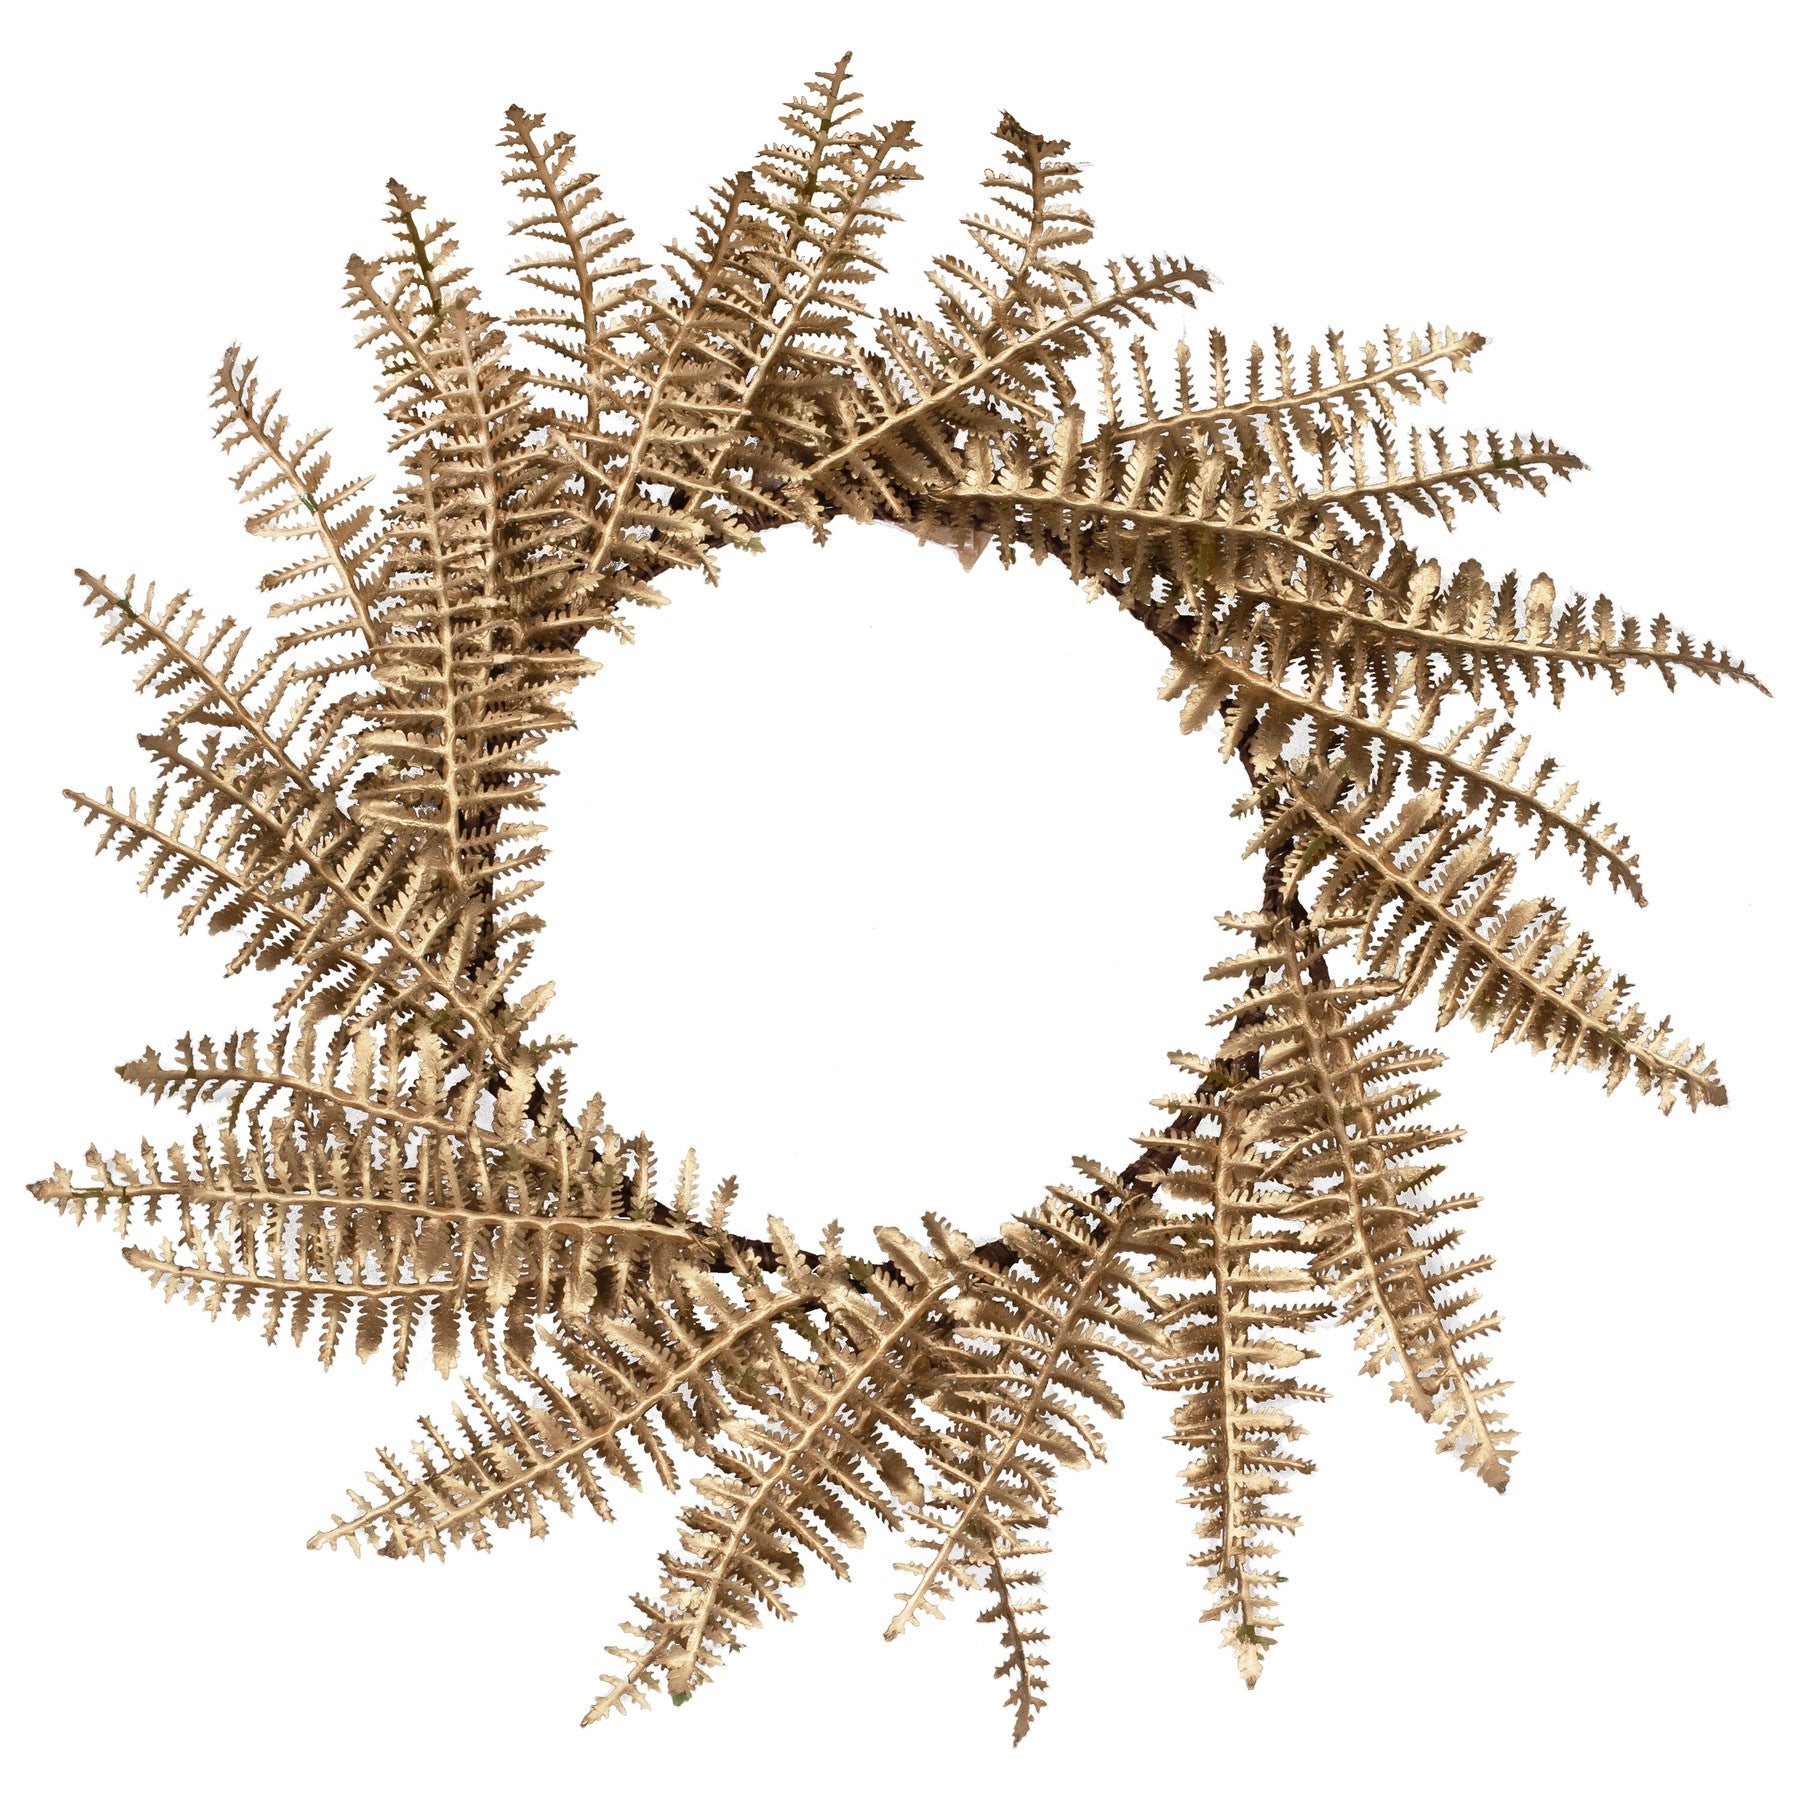 Decoration of fern leaves for placing the plate, golden 4 pcs